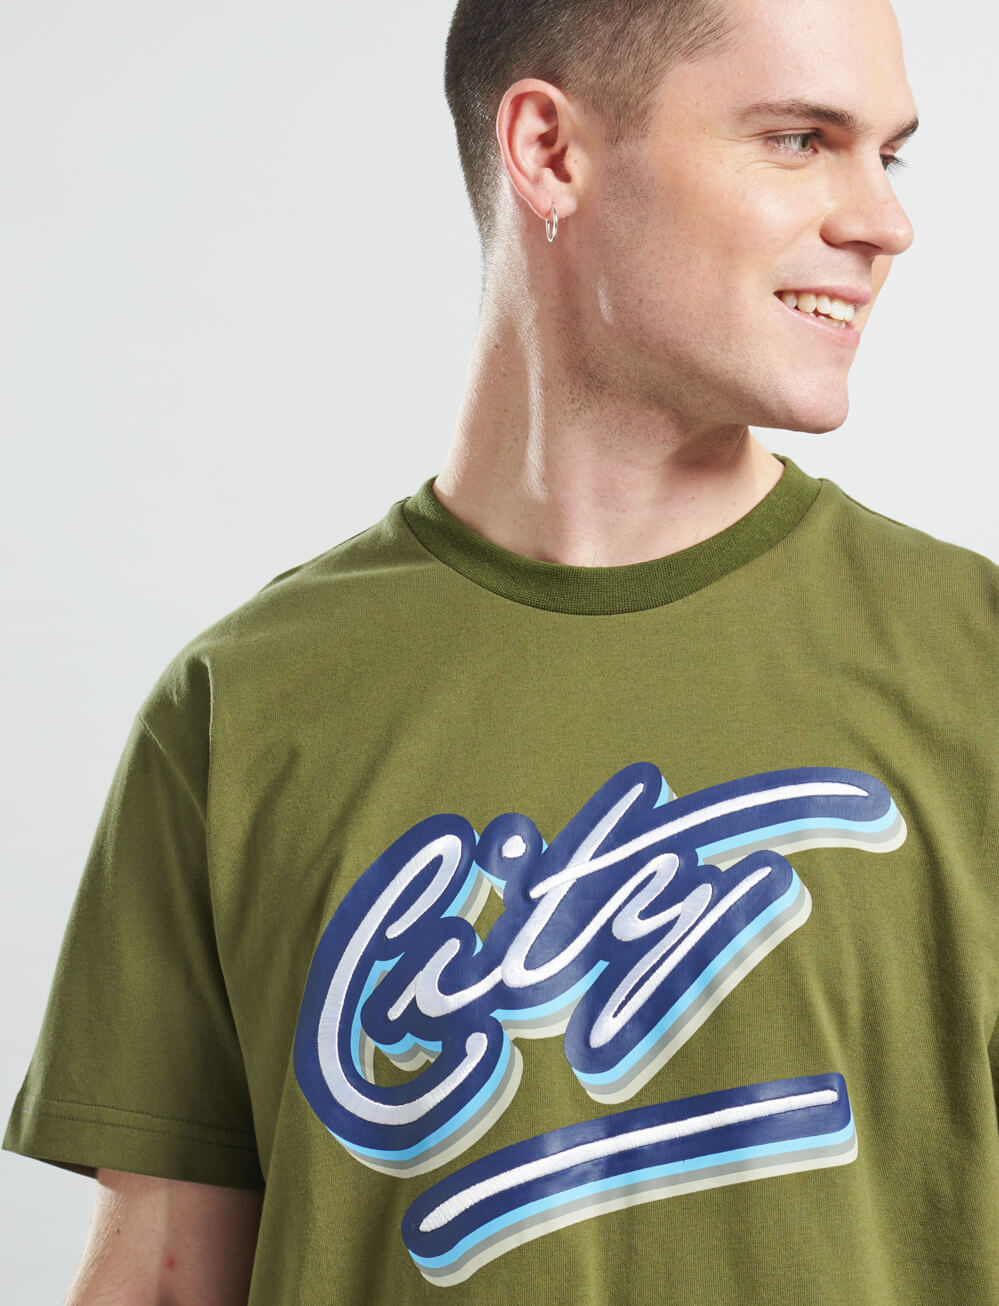 Official Manchester City Graphic T-Shirt - Cypress - The World Football Store